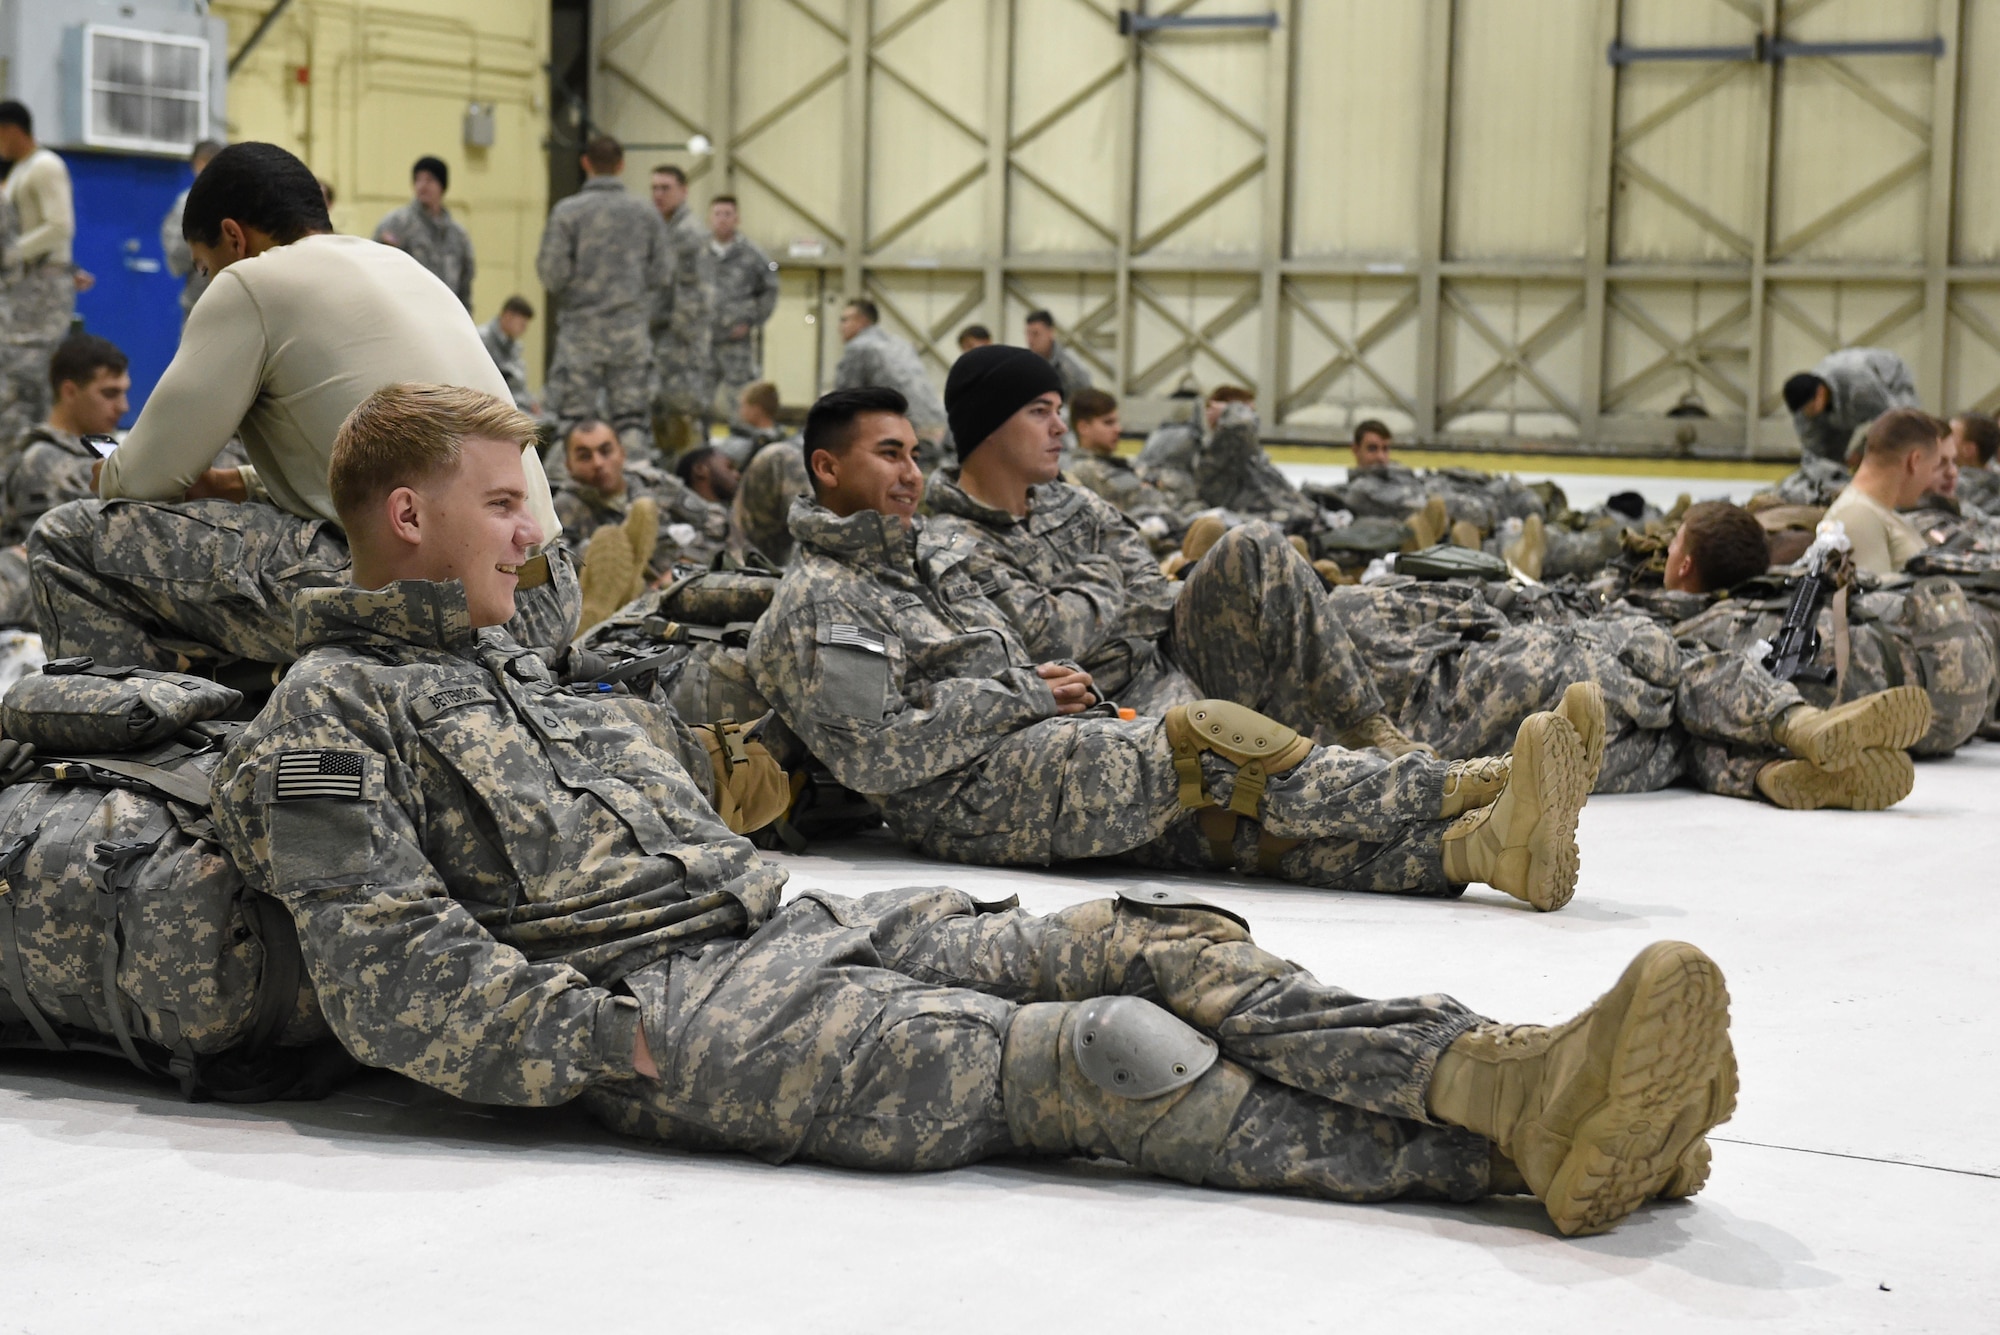 Paratroopers with the 4th Infantry Brigade Combat Team (Airborne), 25th Infantry Division, U.S. Army Alaska, gather at Hangar 1 before a jump at Joint Base Elmendorf-Richardson, Alaska, Oct. 12, 2016. The jump was part of Red Flag-Alaska 17-1, a training exercise for U.S. and international forces flown under simulated air combat conditions. 